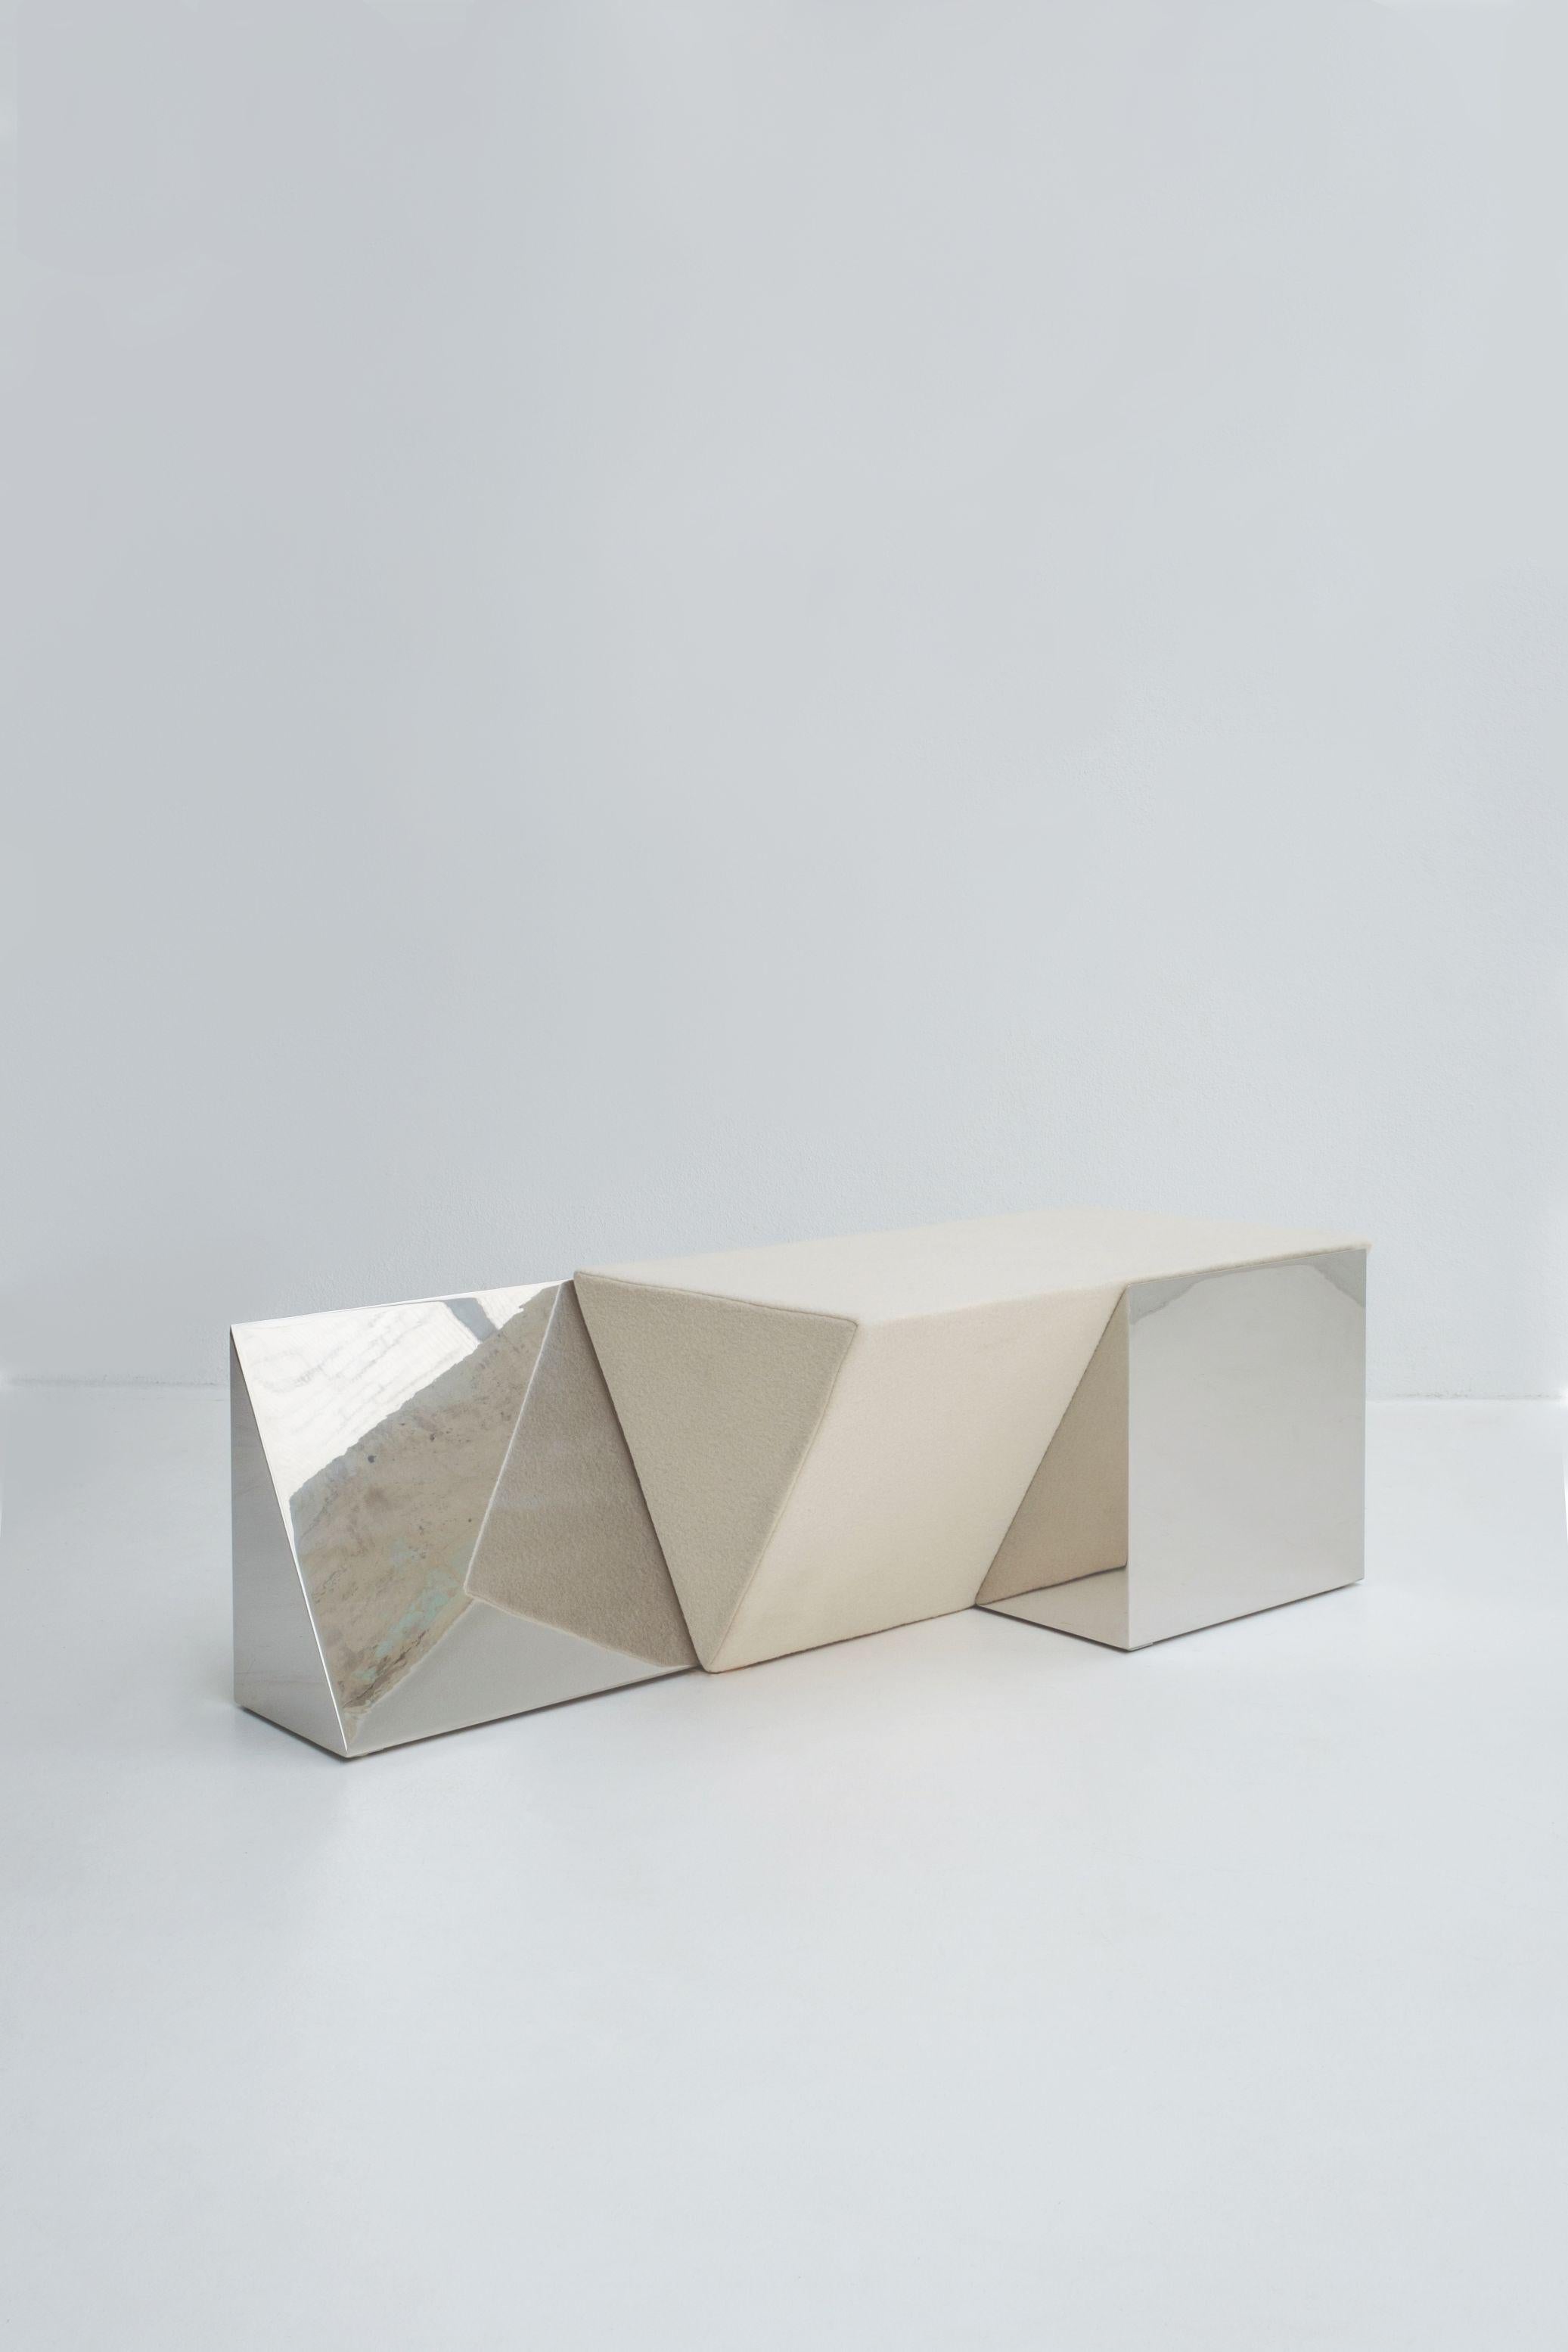 Miljevina bench by Nortstudio
Dimensions: 40 x 120 x 46 cm
Materials: Mirror polished steel, mirror-look HPL.


Three abandoned buildings with a strong geometrical character were the inspiration behind a new collection of sculptural